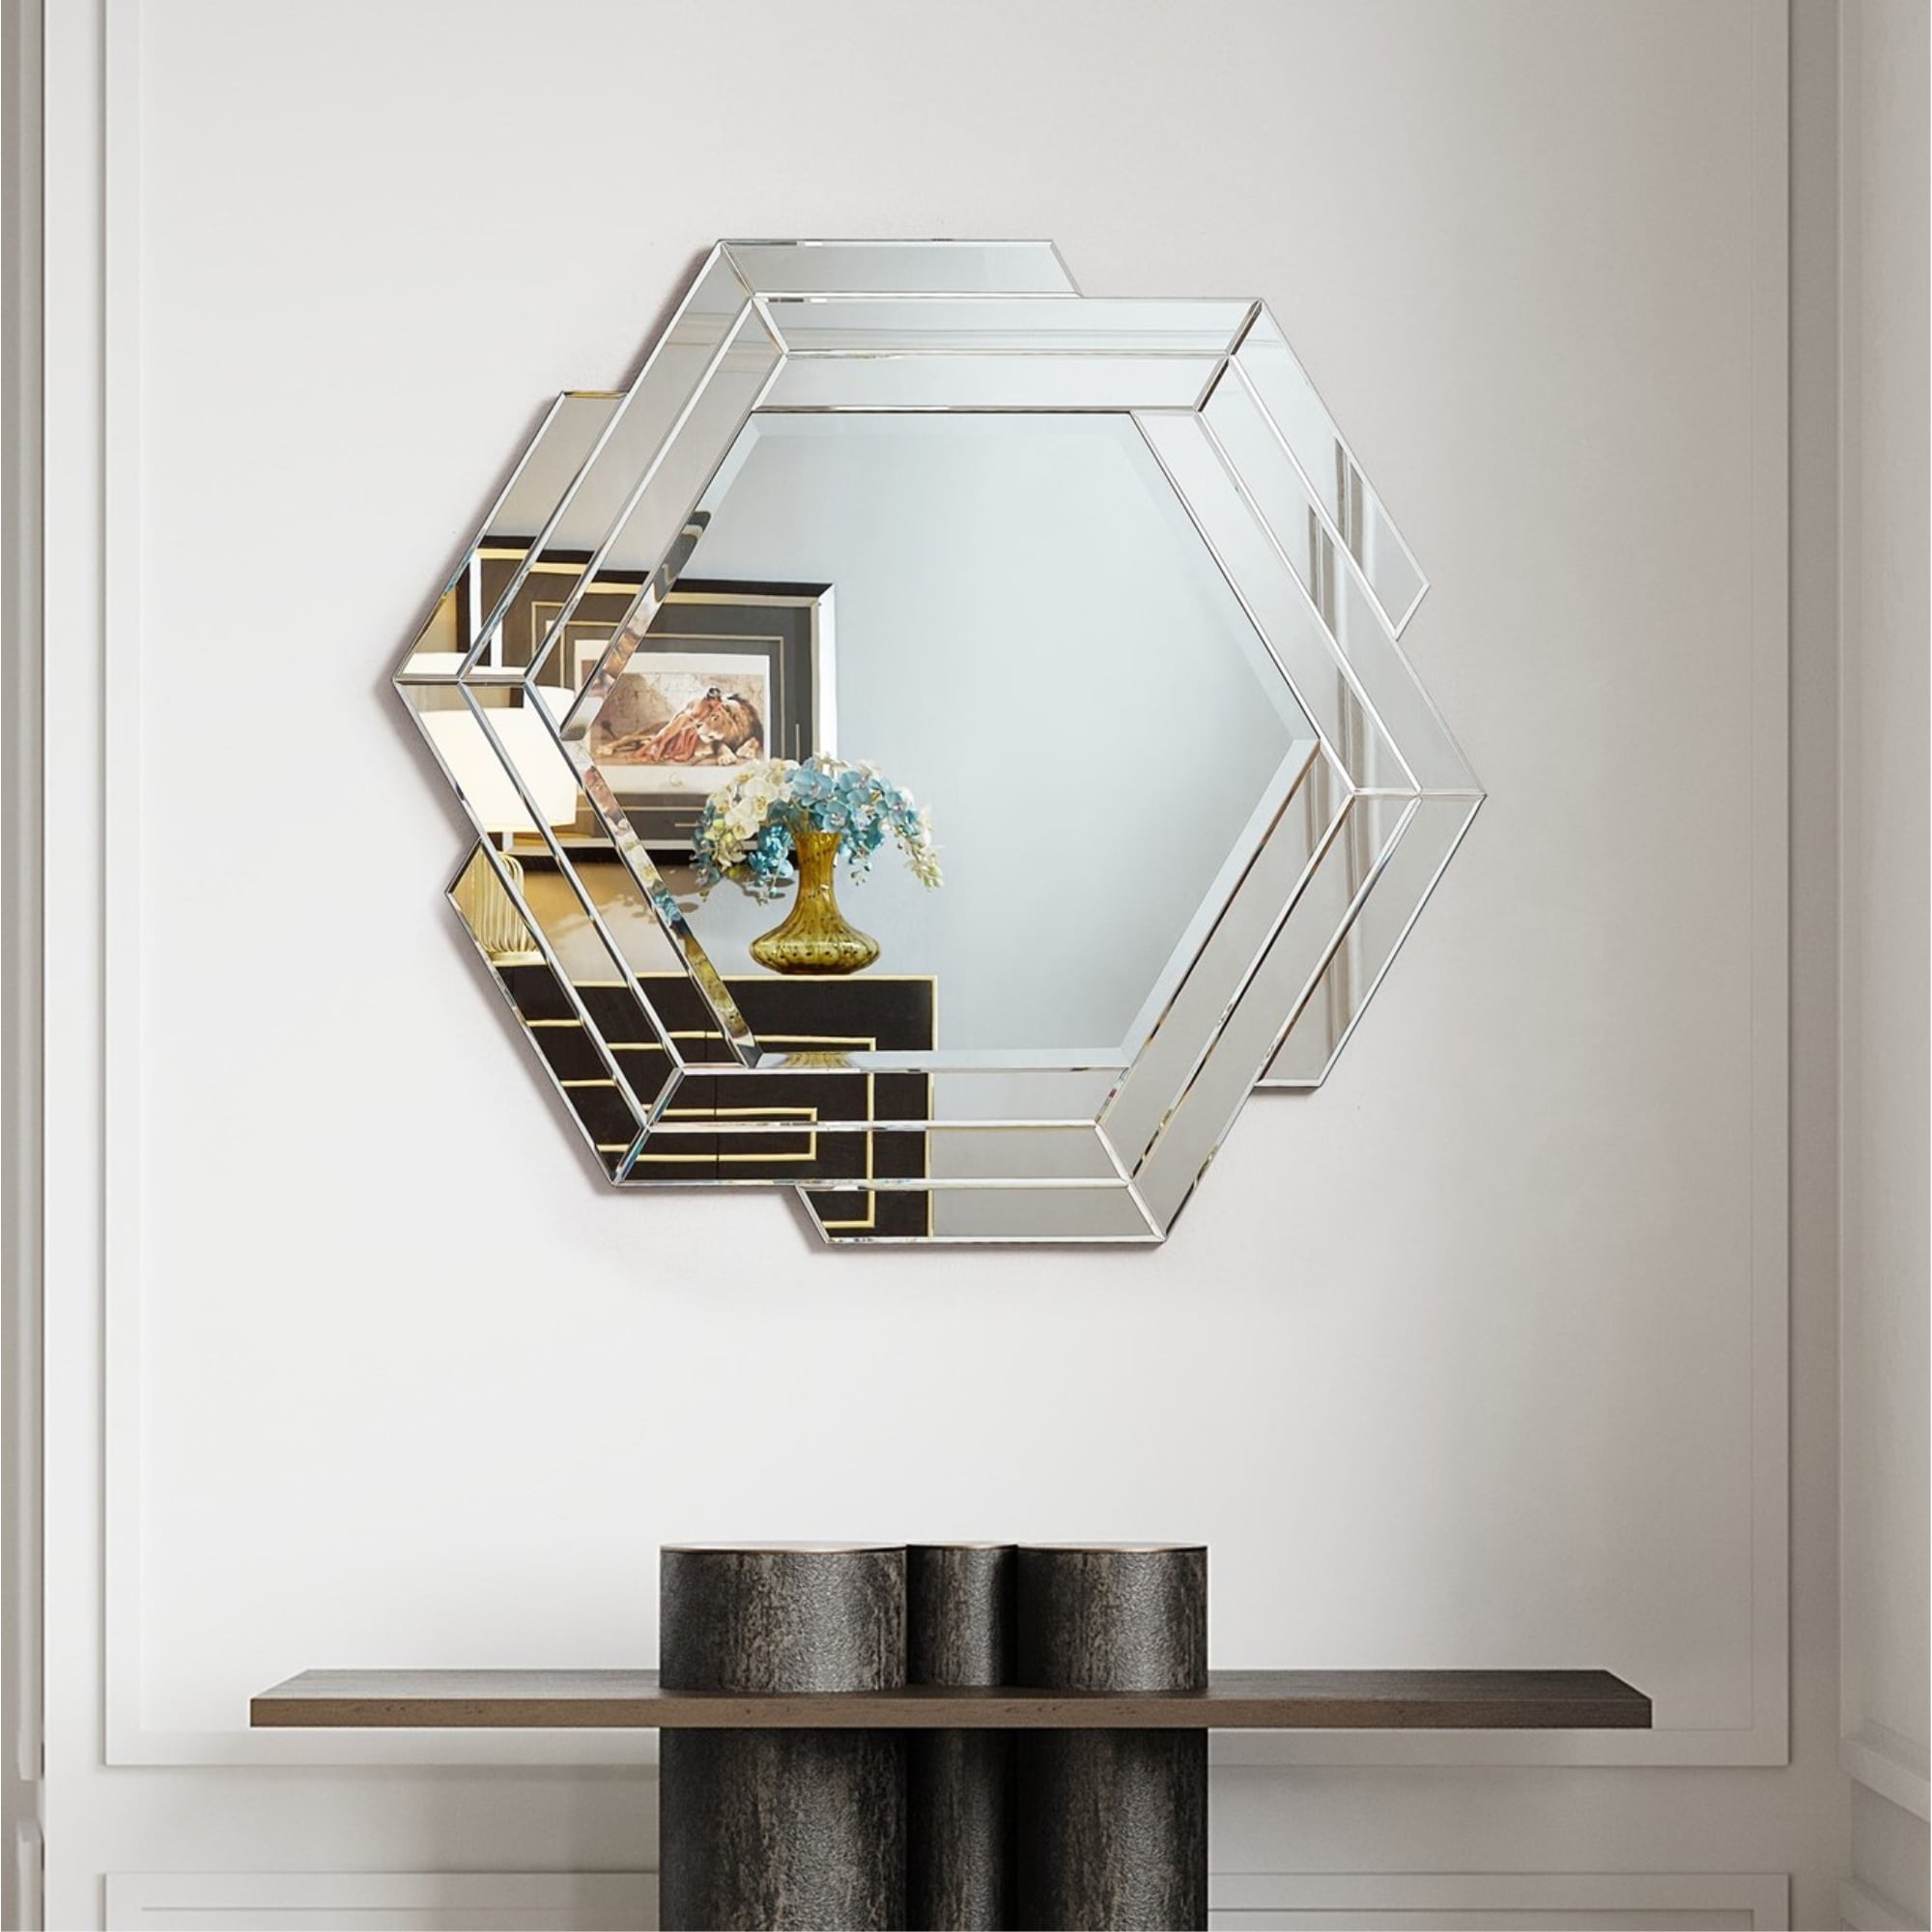 Vanity Wall Mirror Inspired Home Audriana Hexagon Accent Wall Mirror Frameless Round Silver Polished 42.9x42.9